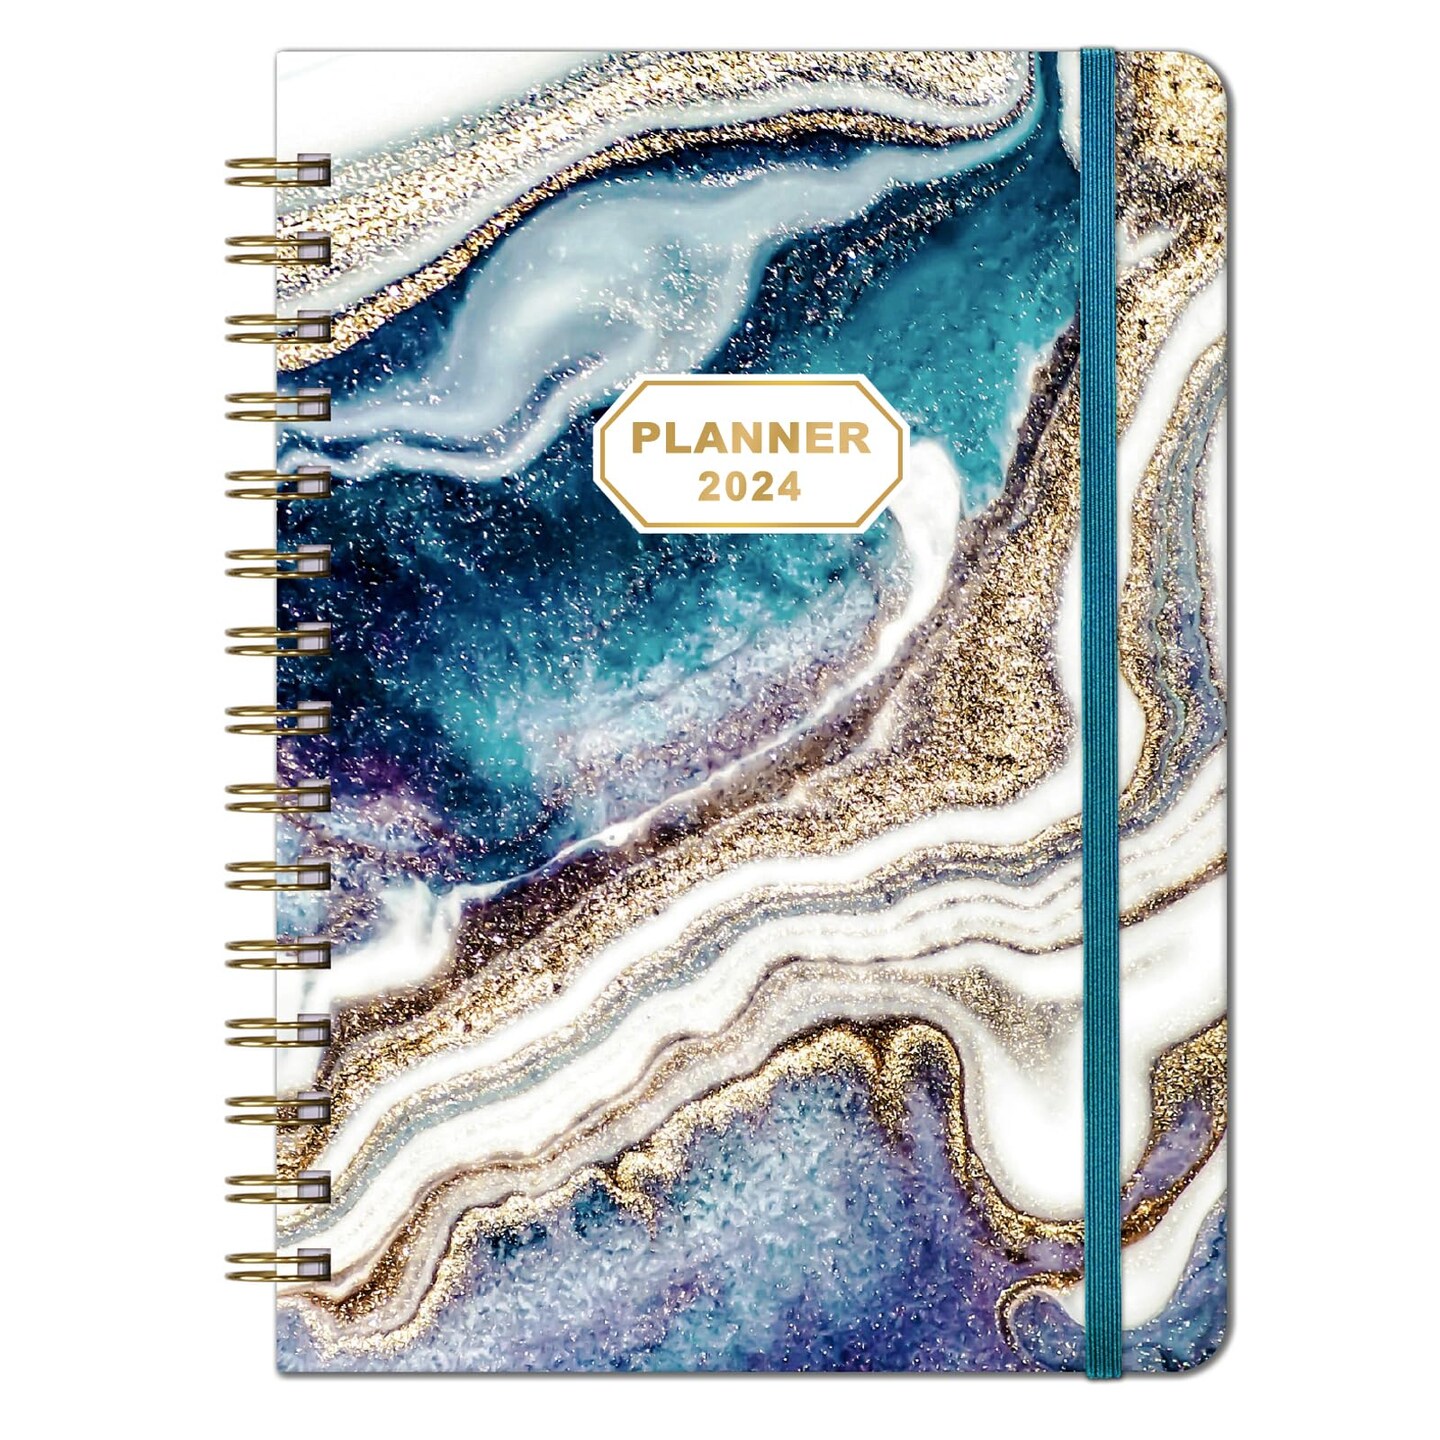 2024 Planner - 2024 Planner Weekly and Monthly, 2024 Calendar Planner from Jan 2024 to Dec 2024, Planner 2024 with, Inner Pocket, Tabs